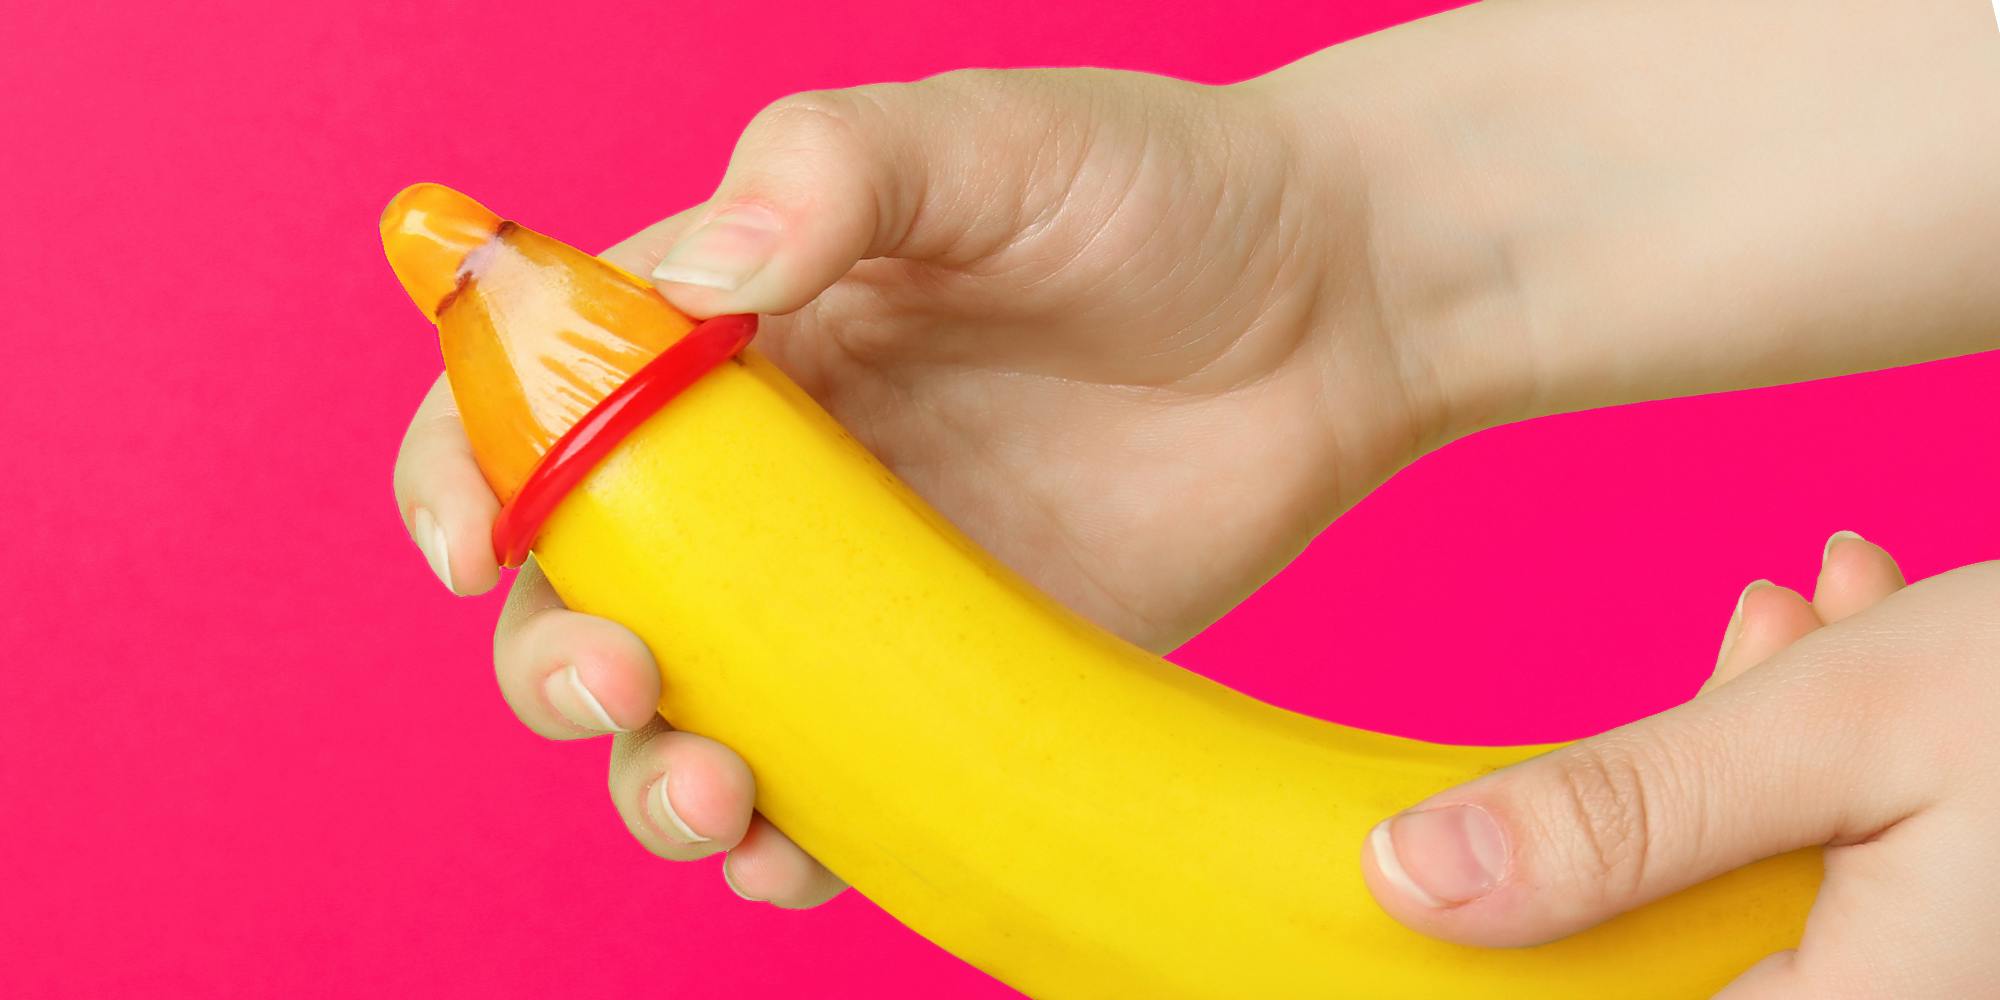 Everything you ever needed to know about putting on a condom